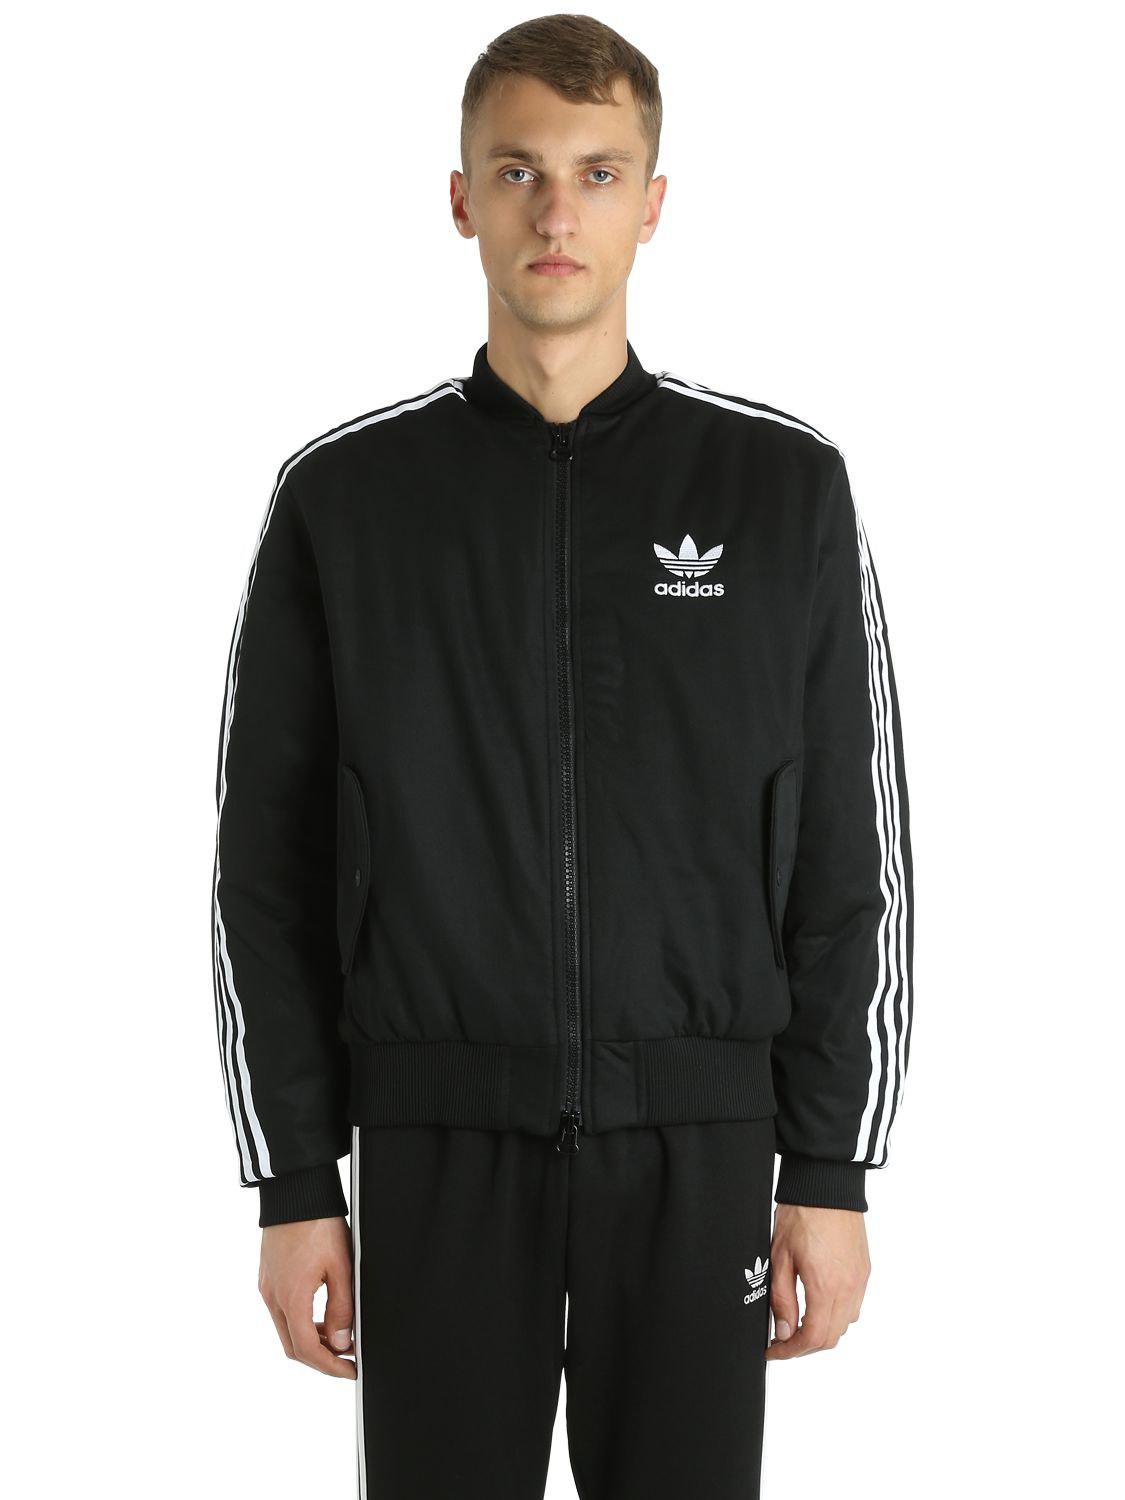 adidas Originals Synthetic Ma1 Padded Jacket in Black for Men - Lyst